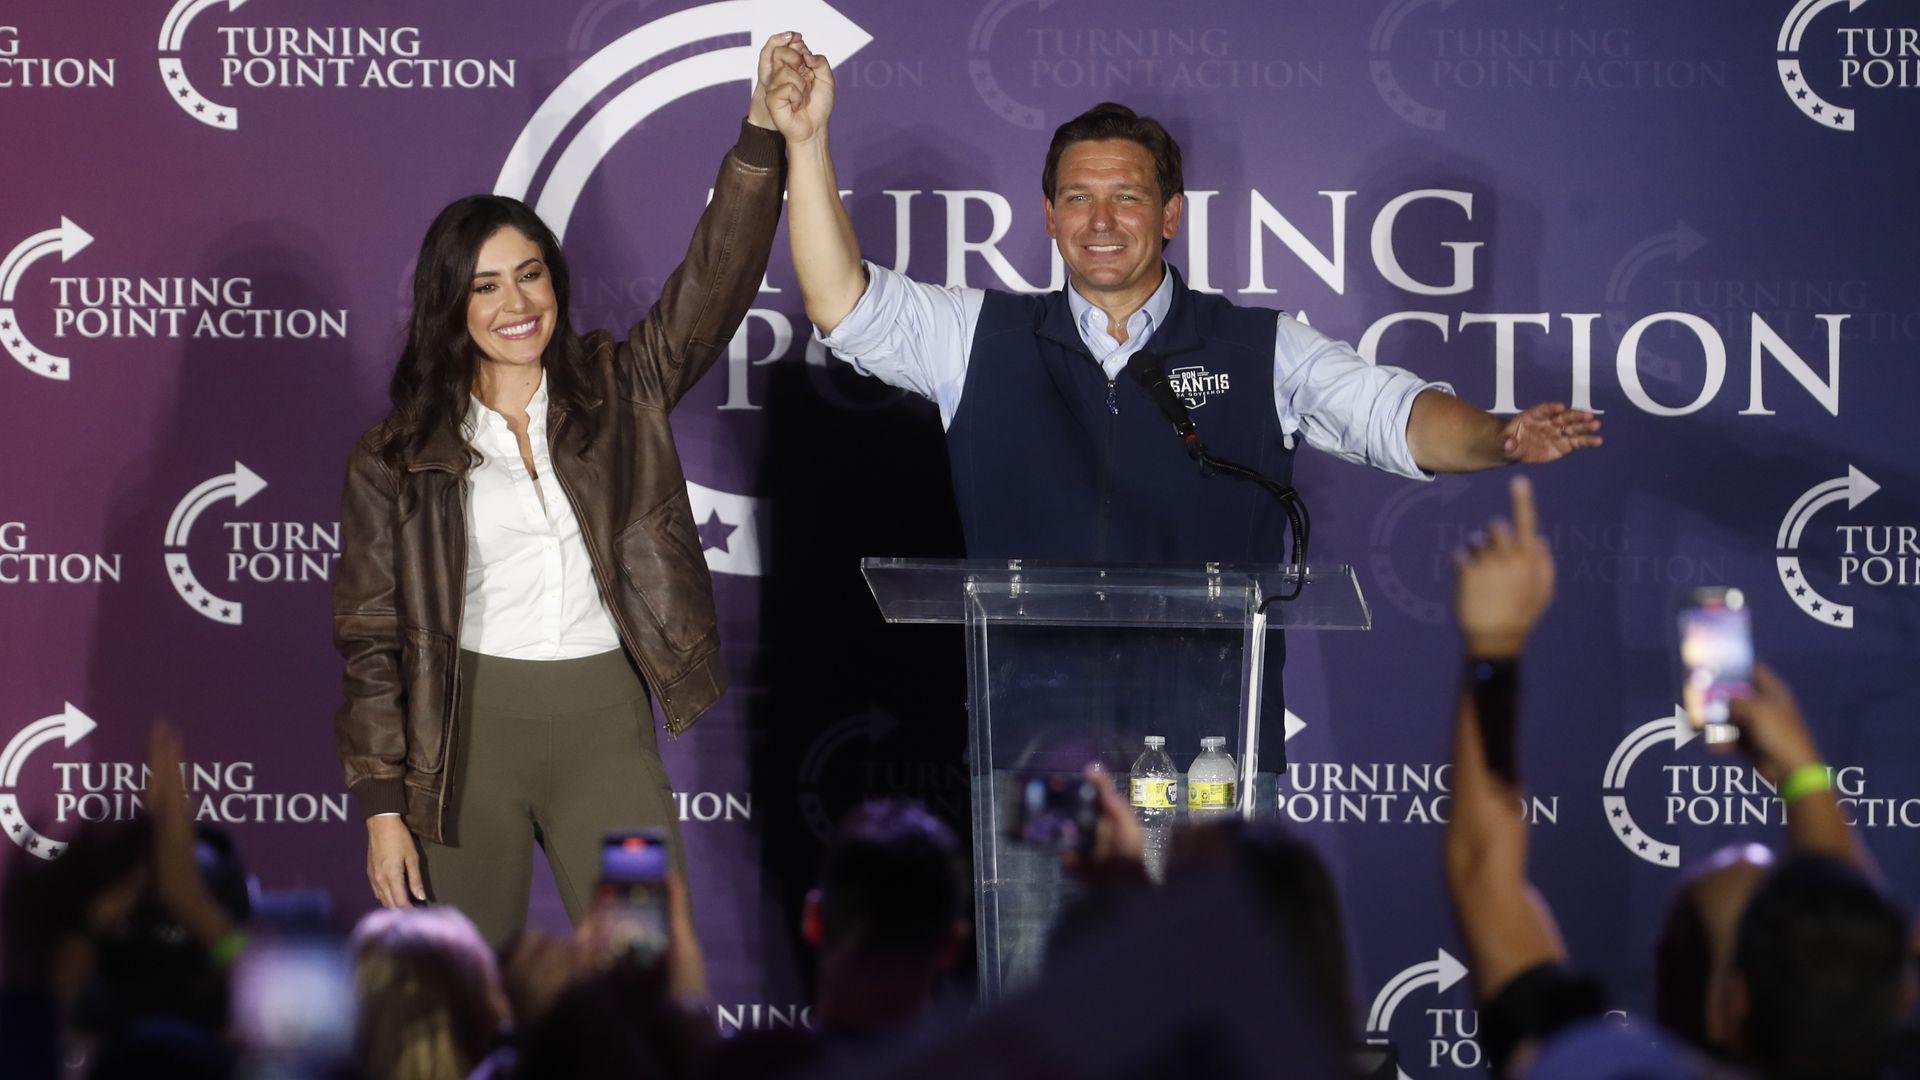 Ron DeSantis holds up Anna Paulina Luna's arm as a crowd cheers at a rally